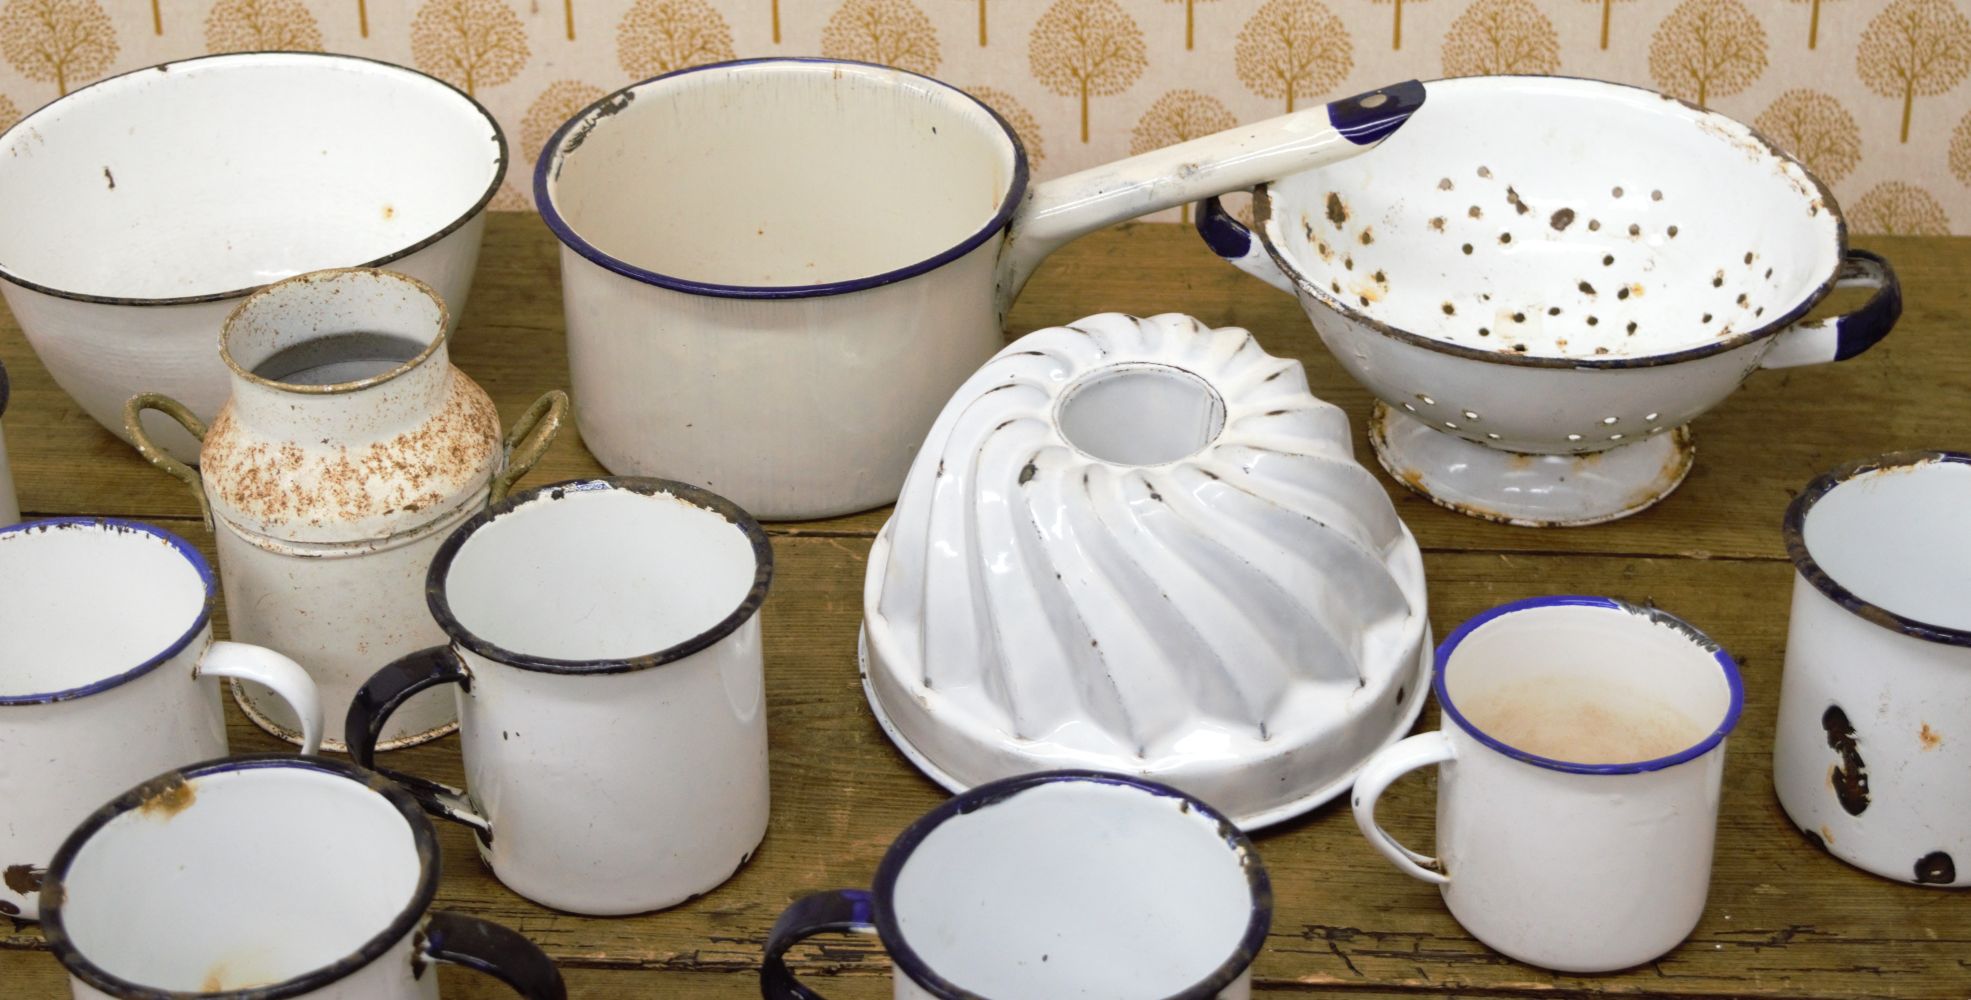 COLLECTION OF 19TH-CENTURY ENAMEL KITCHEN ITEMS - Image 2 of 2